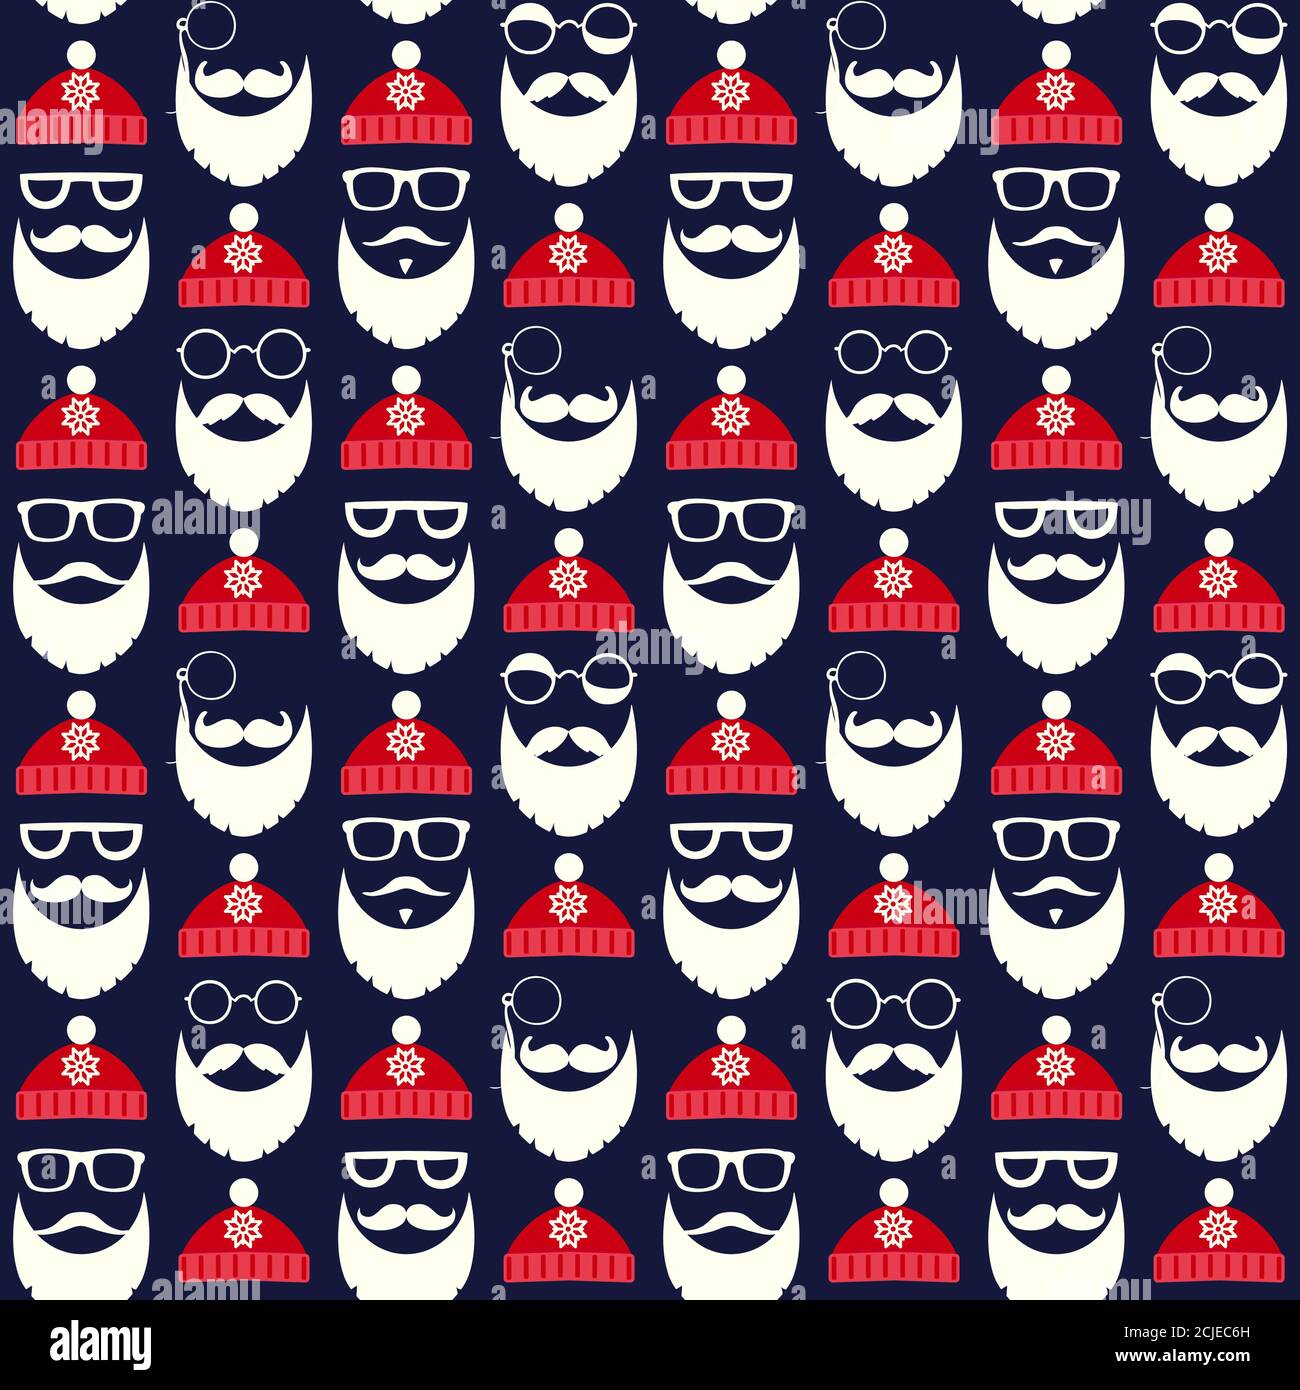 Seamless pattern of faces with Santa hats, mustache and beards. Various doodles Christmas Santa design elements. Holiday icons Stock Vector